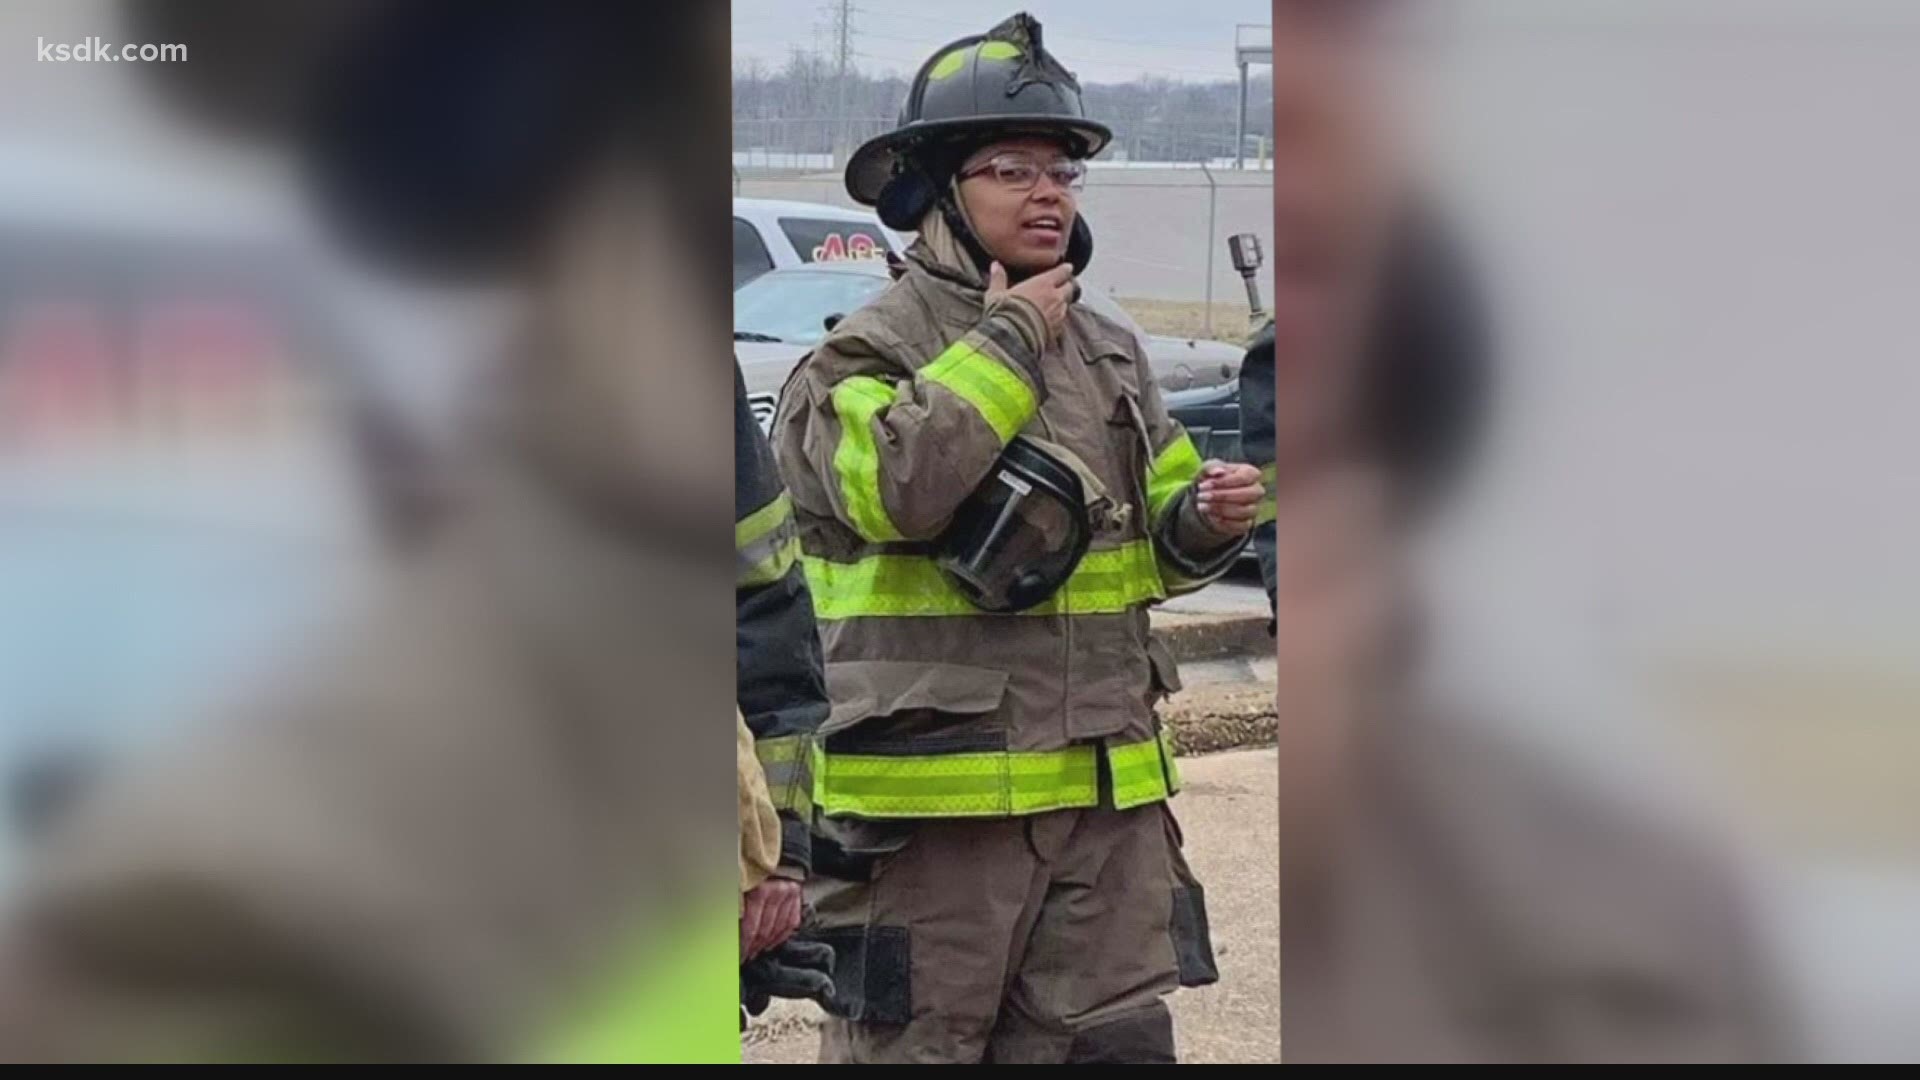 The Kinloch Fire Protection District said that Bufford underwent surgeries Wednesday afternoon to repair the bullet hole in her skull and to place a shunt.